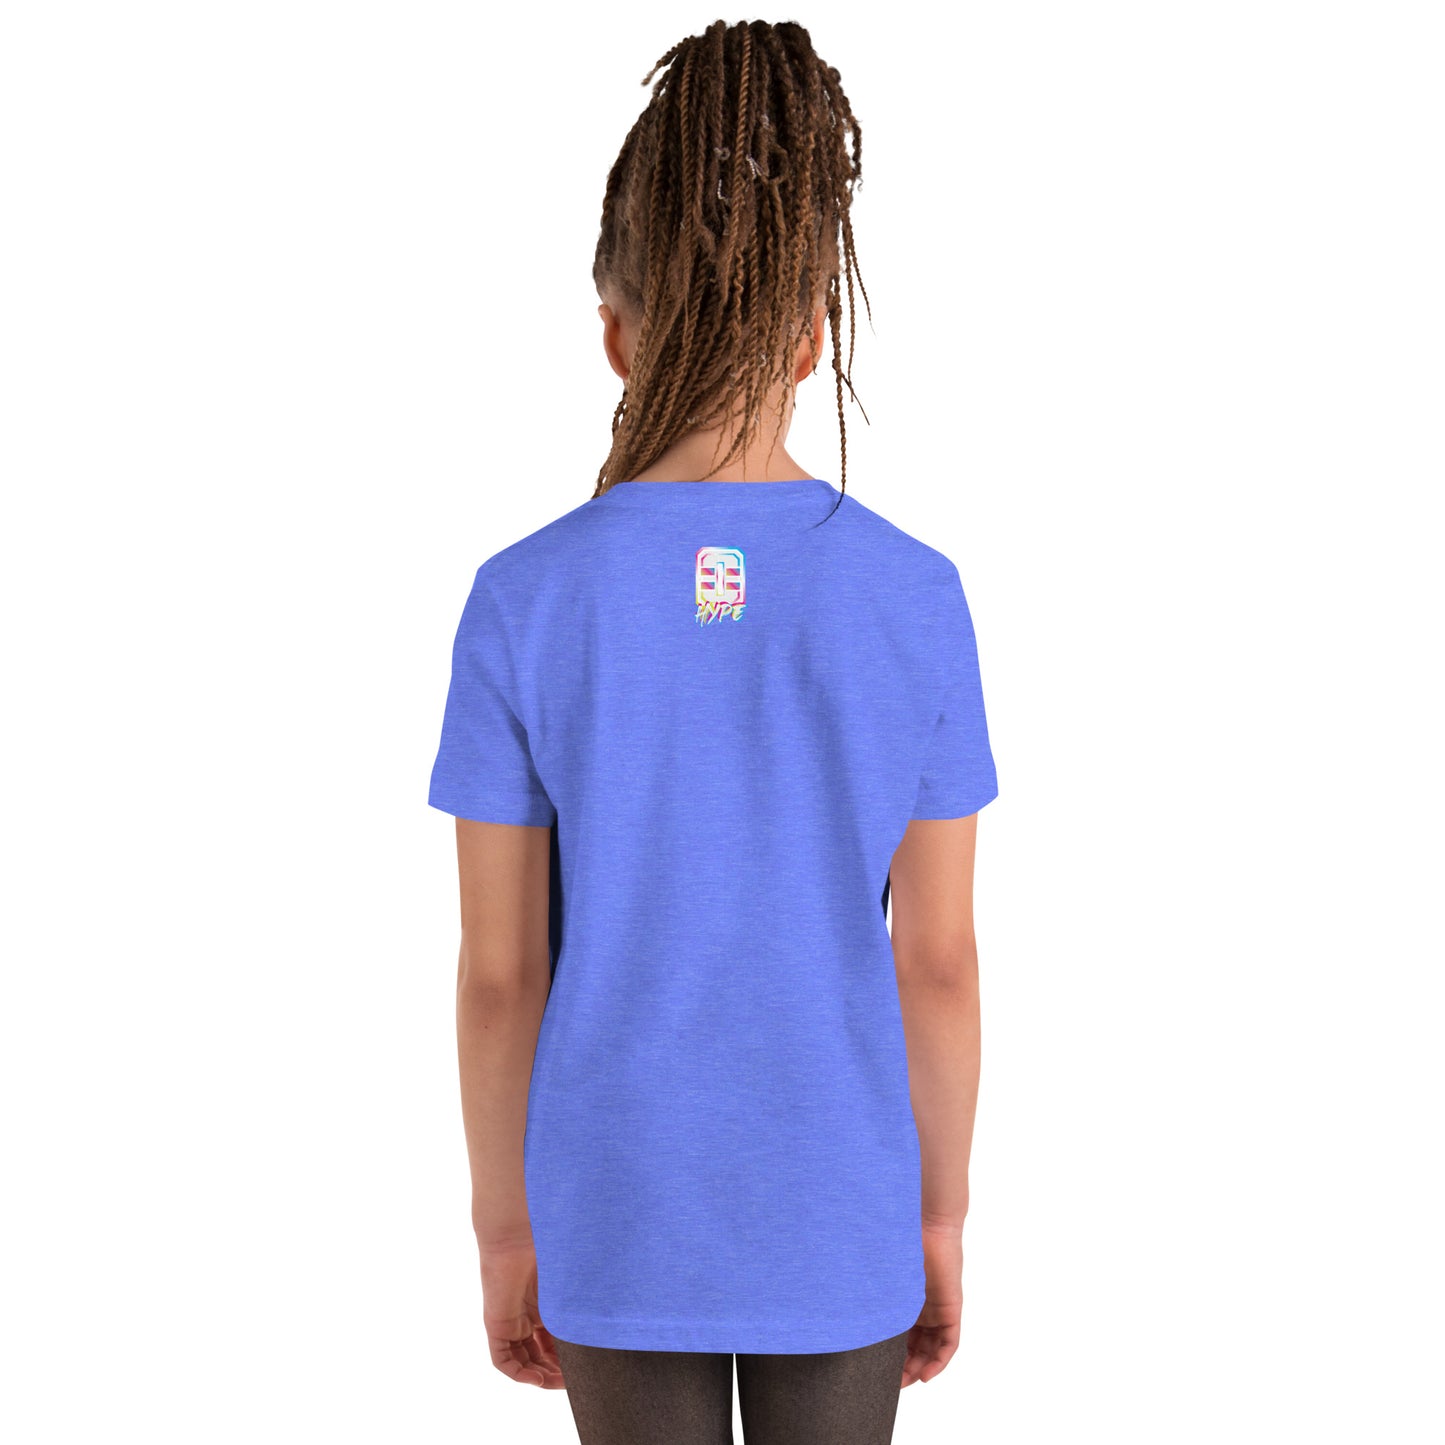 OM Hype Home Youth Short Sleeve T-Shirt